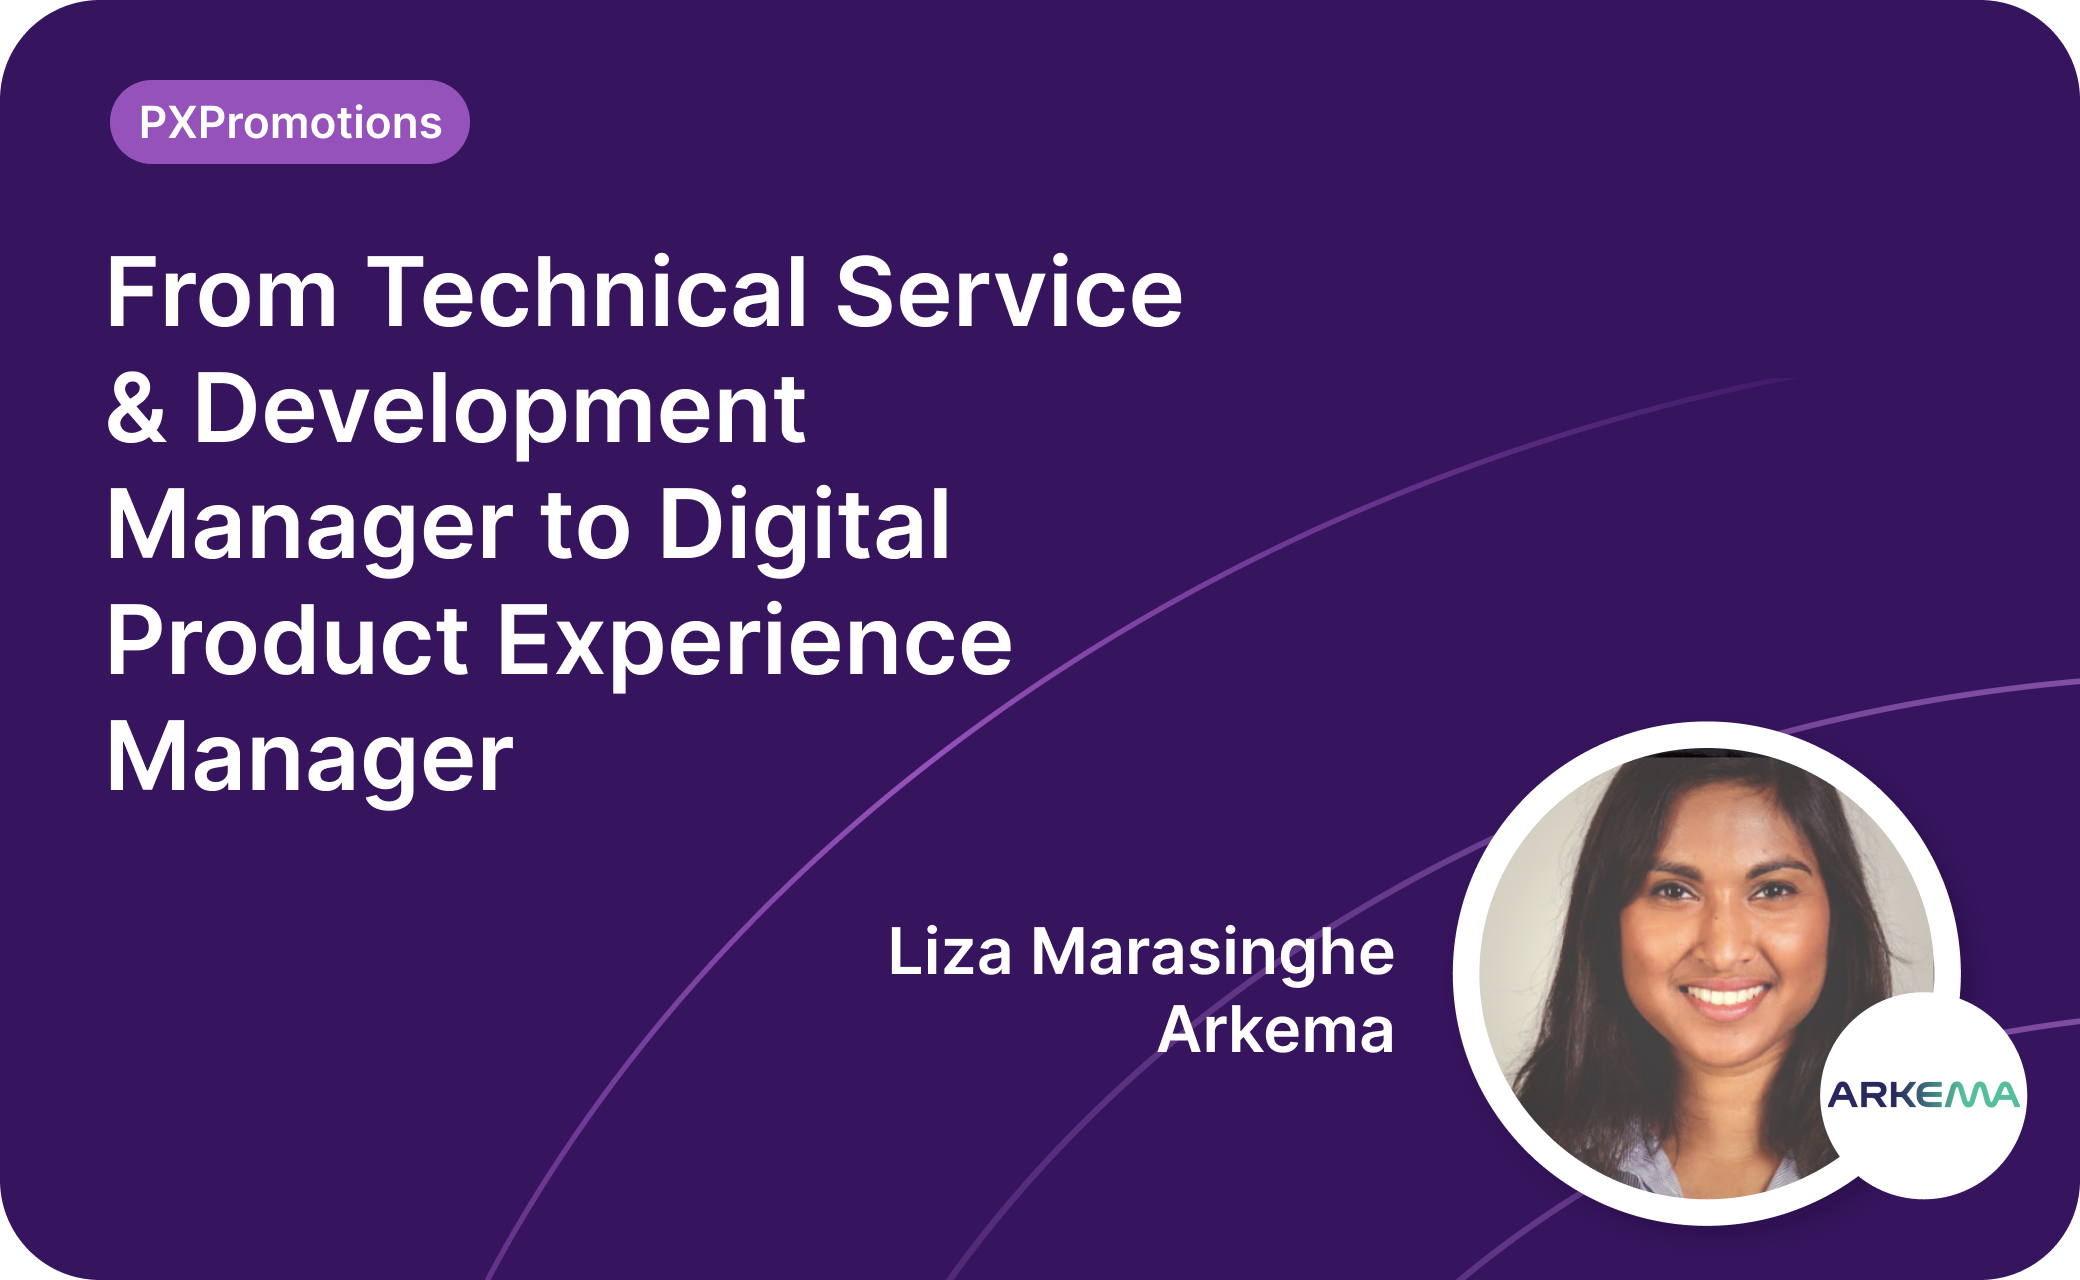 From Technical Service & Development Manager to Digital Product Experience Manager